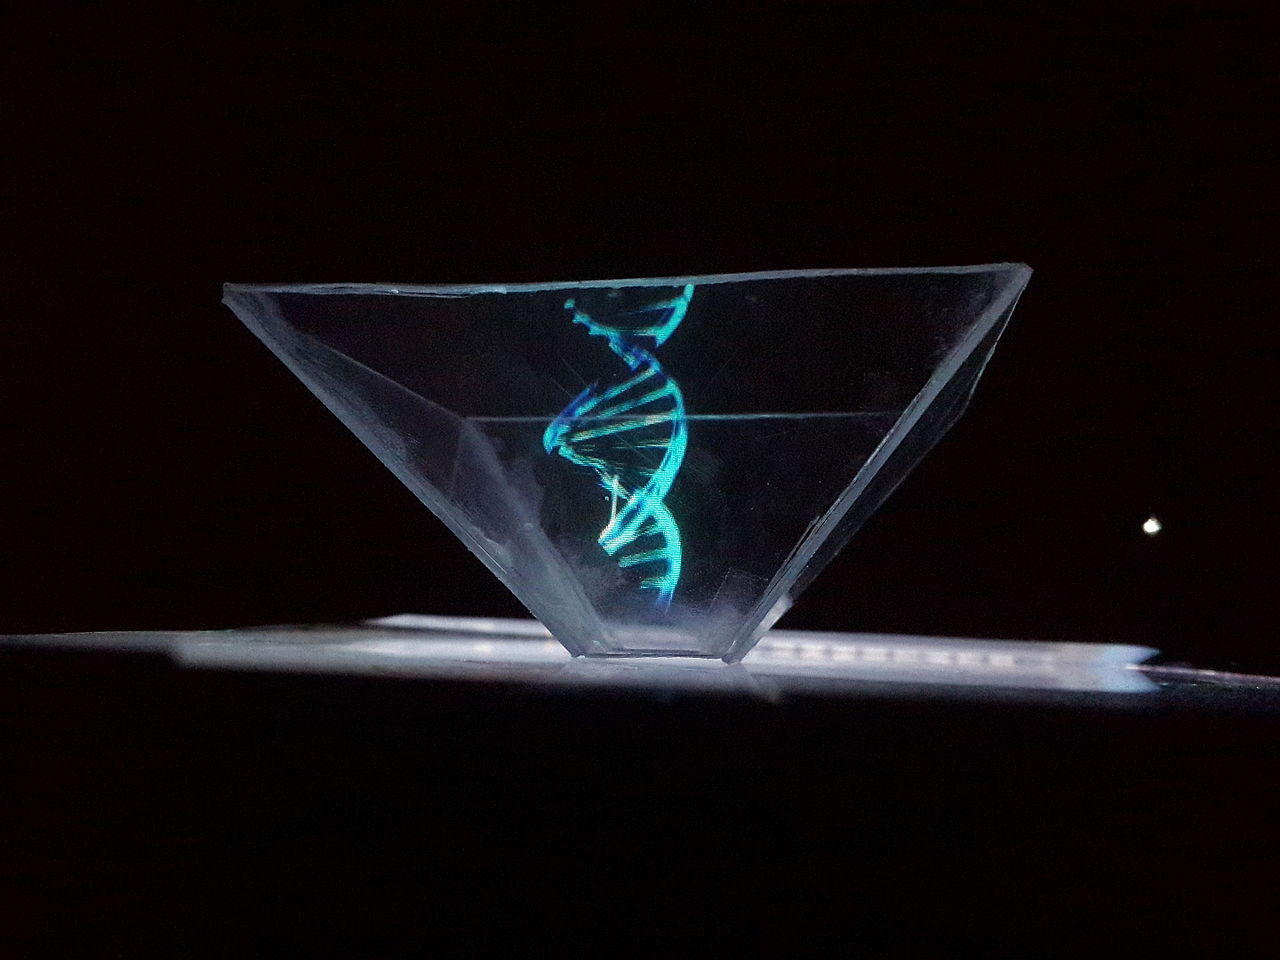 DNA_model_Projected_By_Handmade_Pyramid_Hologram.jpg